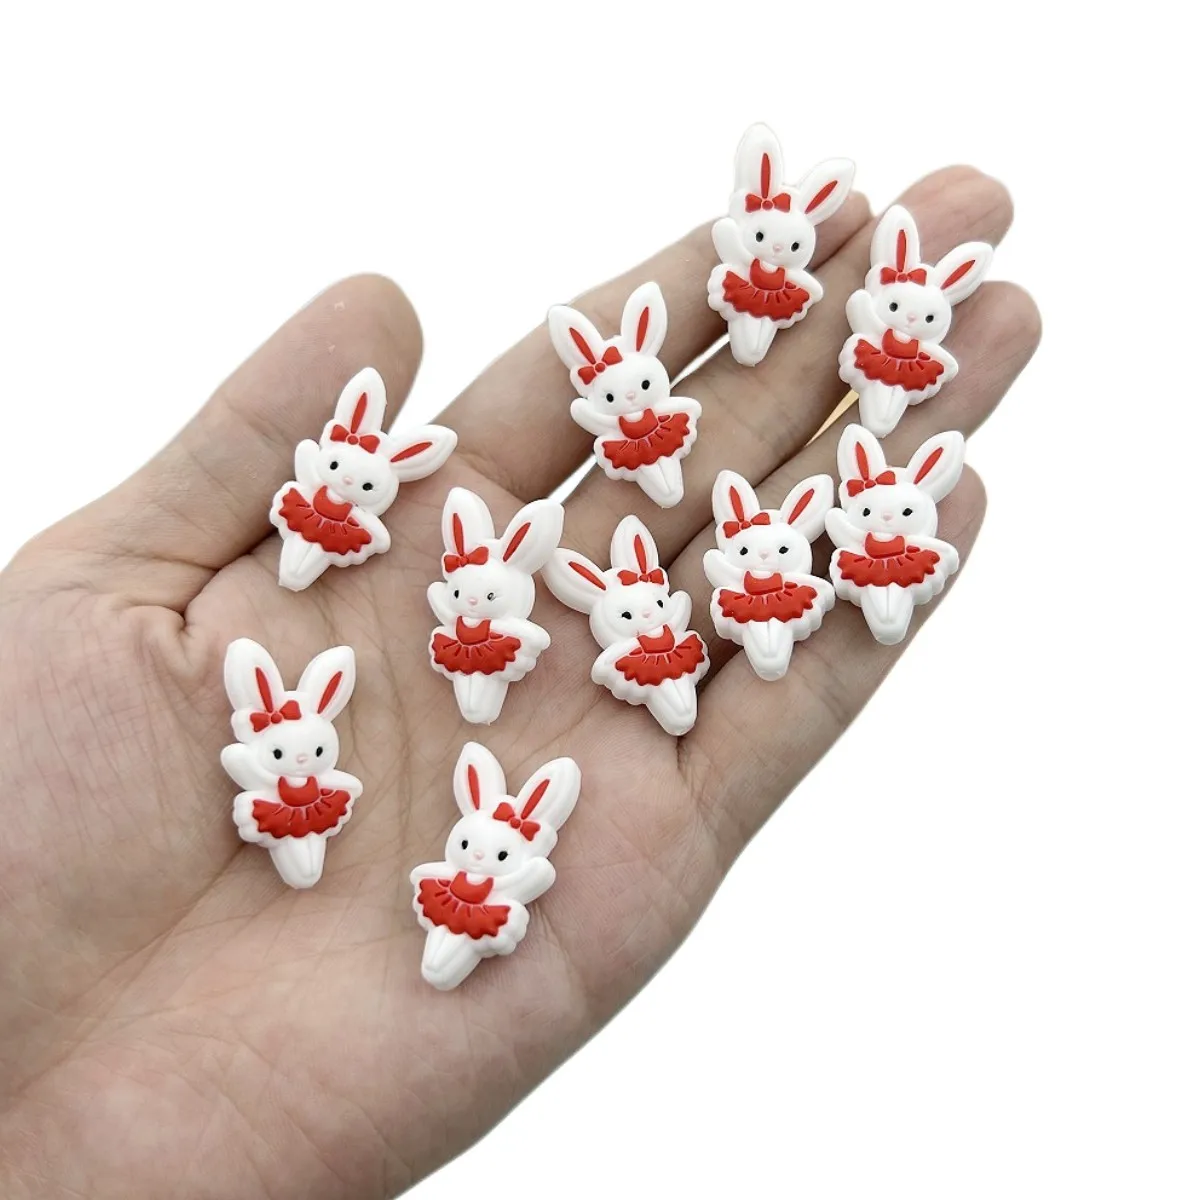 

10pc/lot Silicone Rabbit Beads Baby Teething Pacifier Chains Necklace Accessories Safe Food Grade Nursing Chewing BPA Free Gift